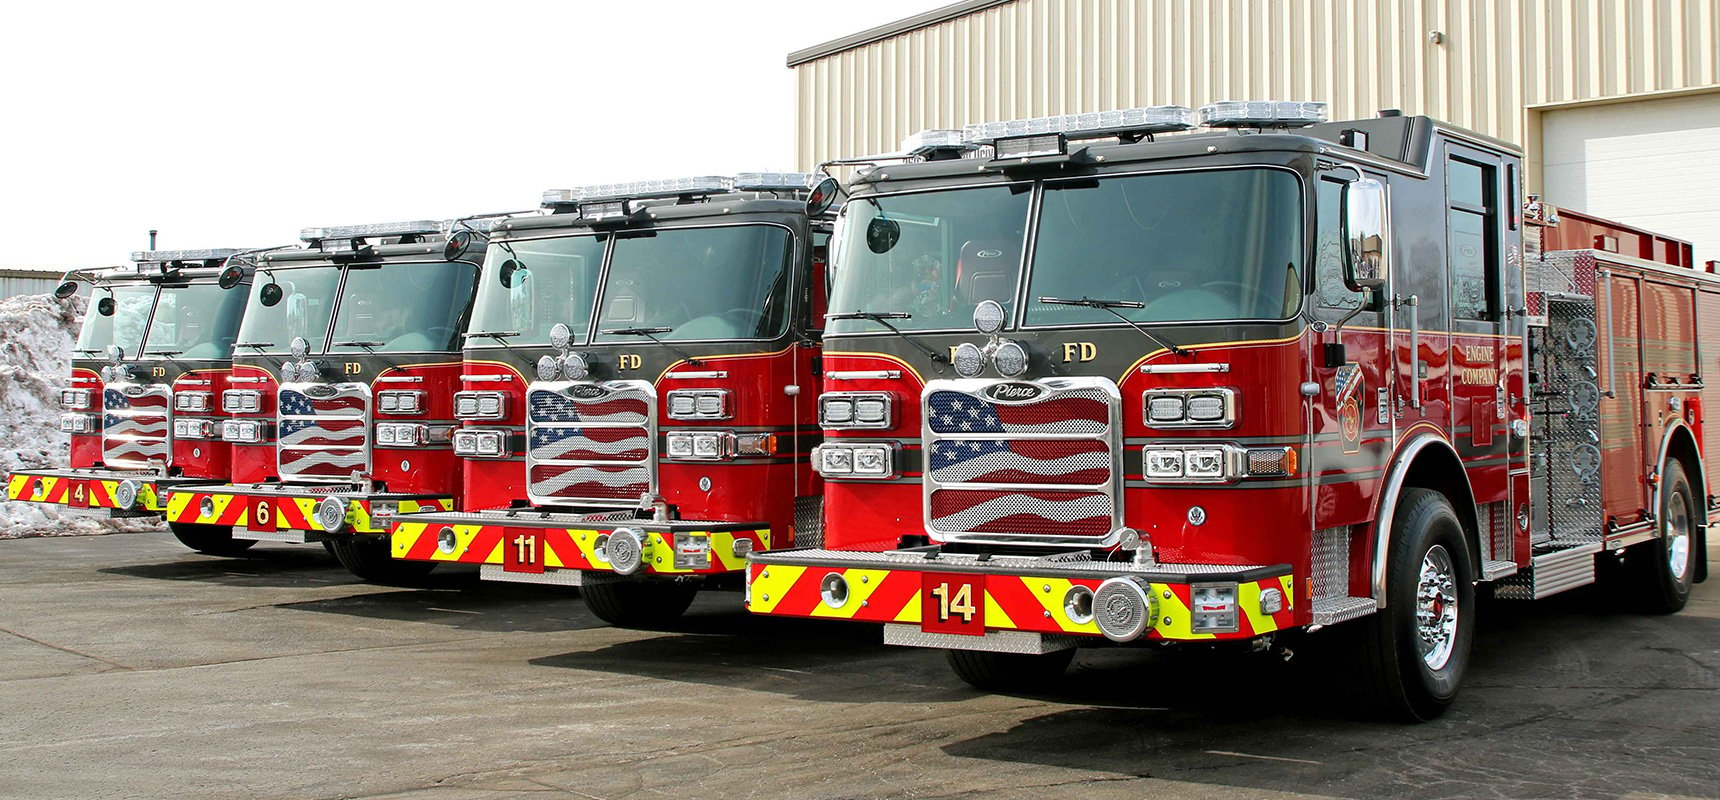 Four standardized Pierce fire trucks all part of the same fleet lined up in a row.